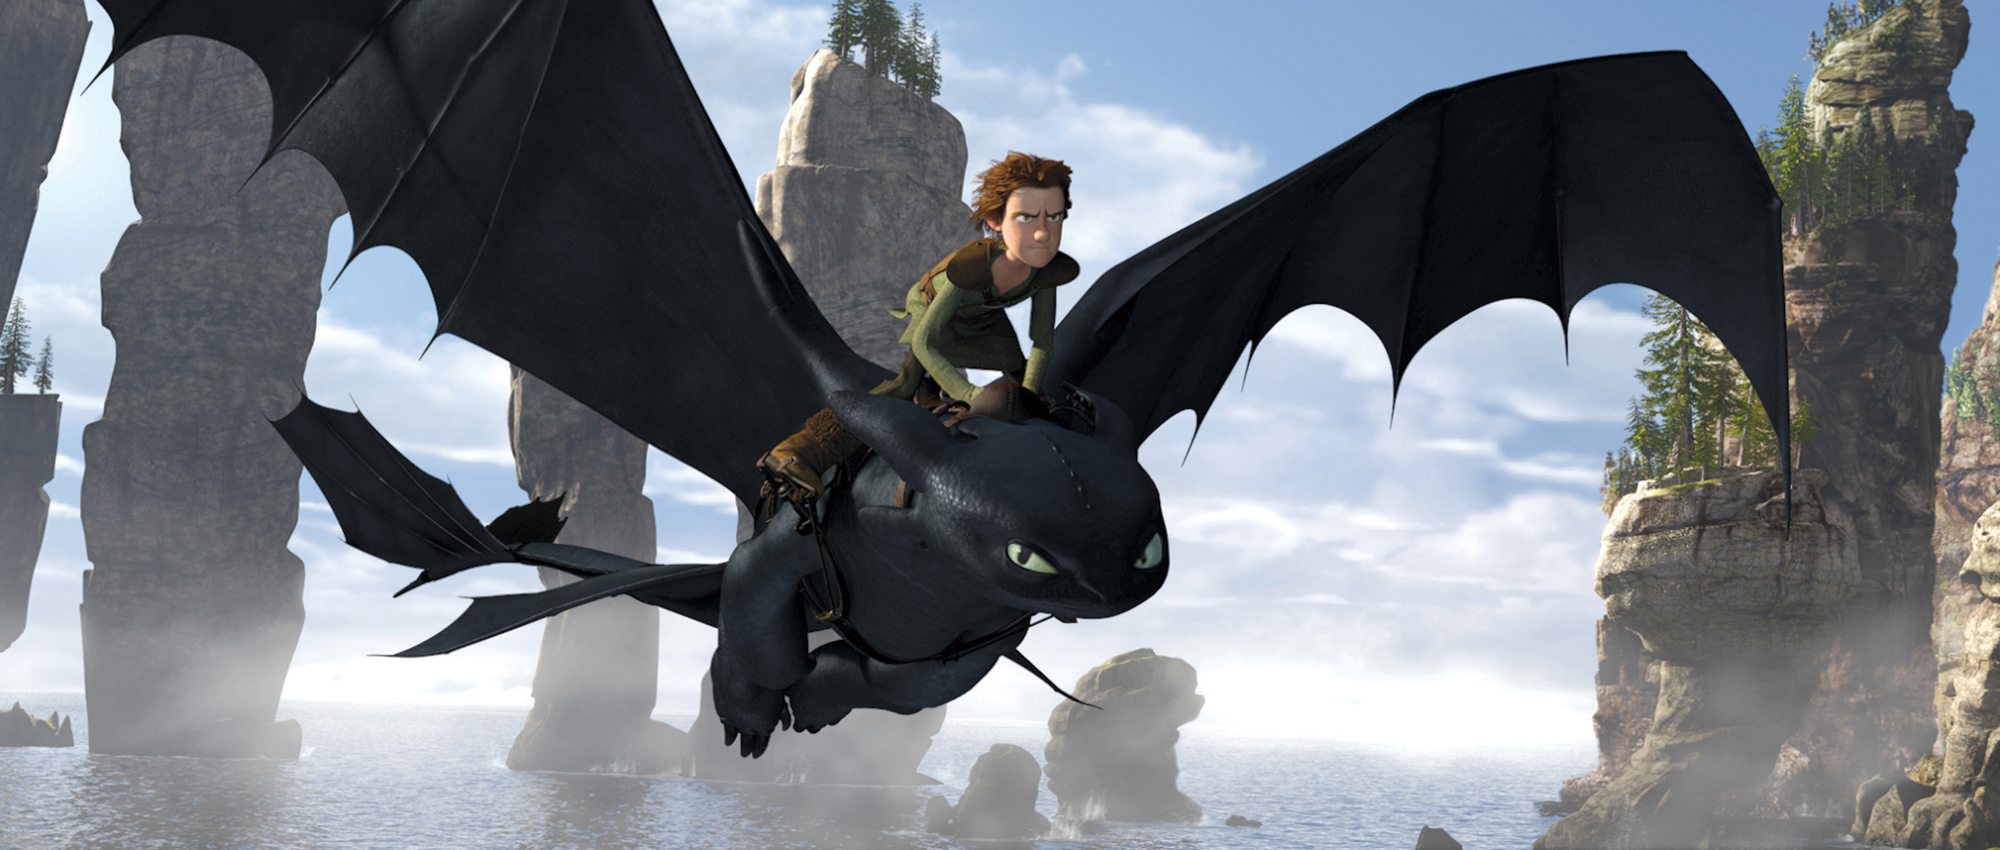 How To Train Your Dragon #2